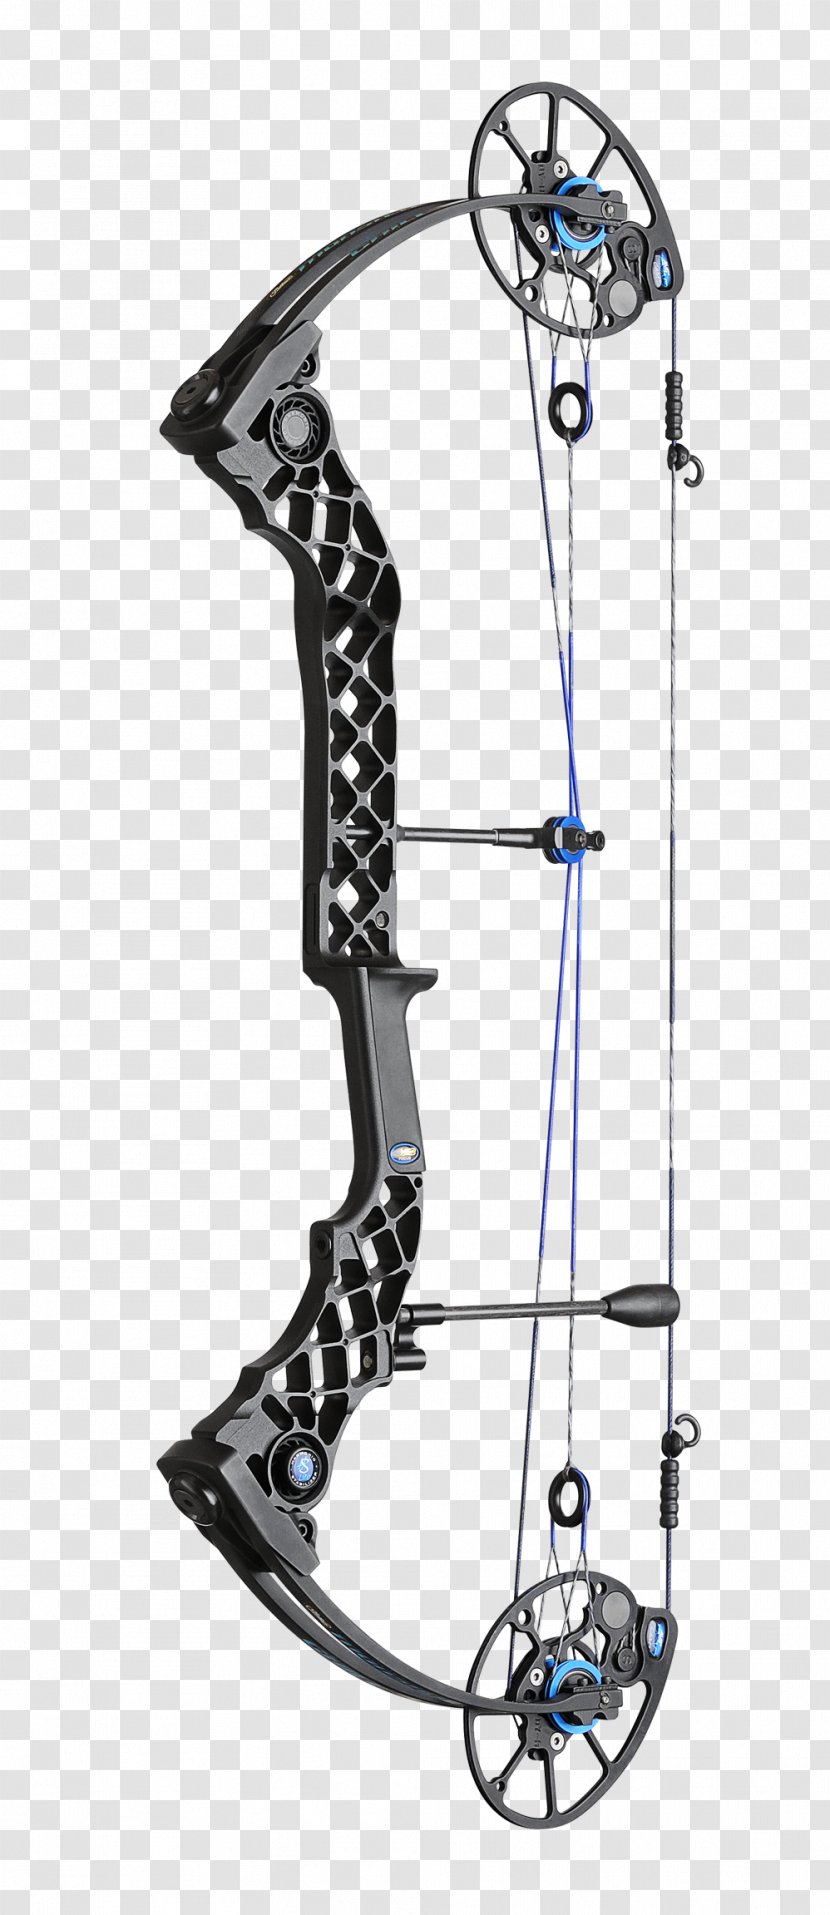 Mathews Archery, Inc. Compound Bows Bow And Arrow Bowhunting - Archery Transparent PNG